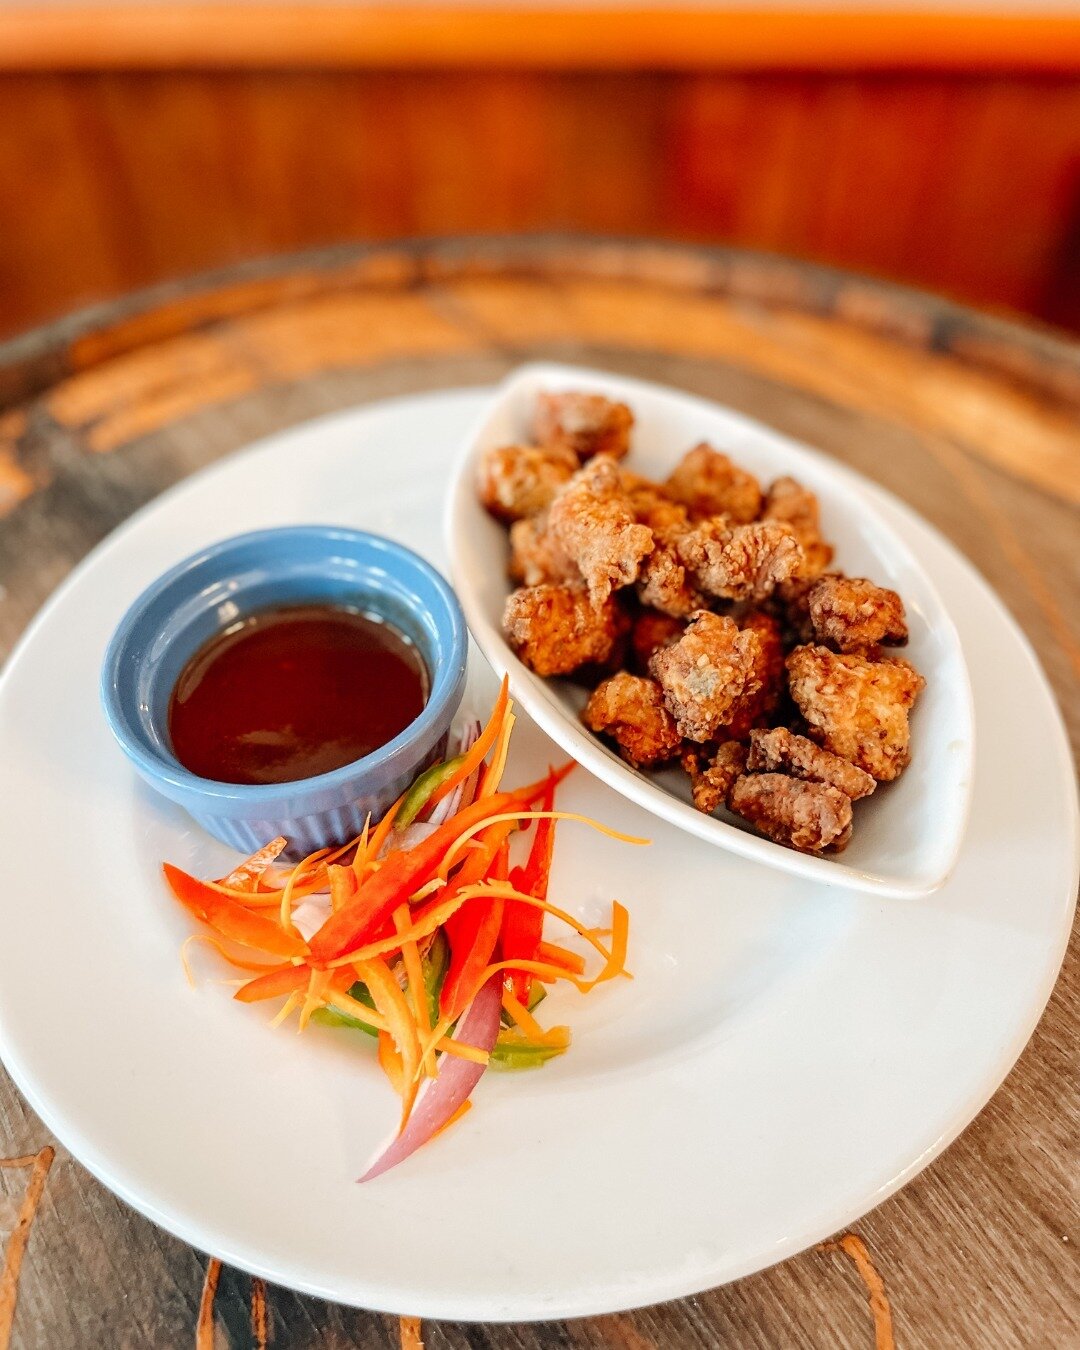 Our Pork Bites are a must-try here at The Ram! 😍 

Give us a call at (246) 432-1246, or use the link in our bio to reserve your table!

#meathouse #pub #barbados #restaurant #liveentertainment #band #visitbarbados #barbadosrestaurants #barbadoslife 